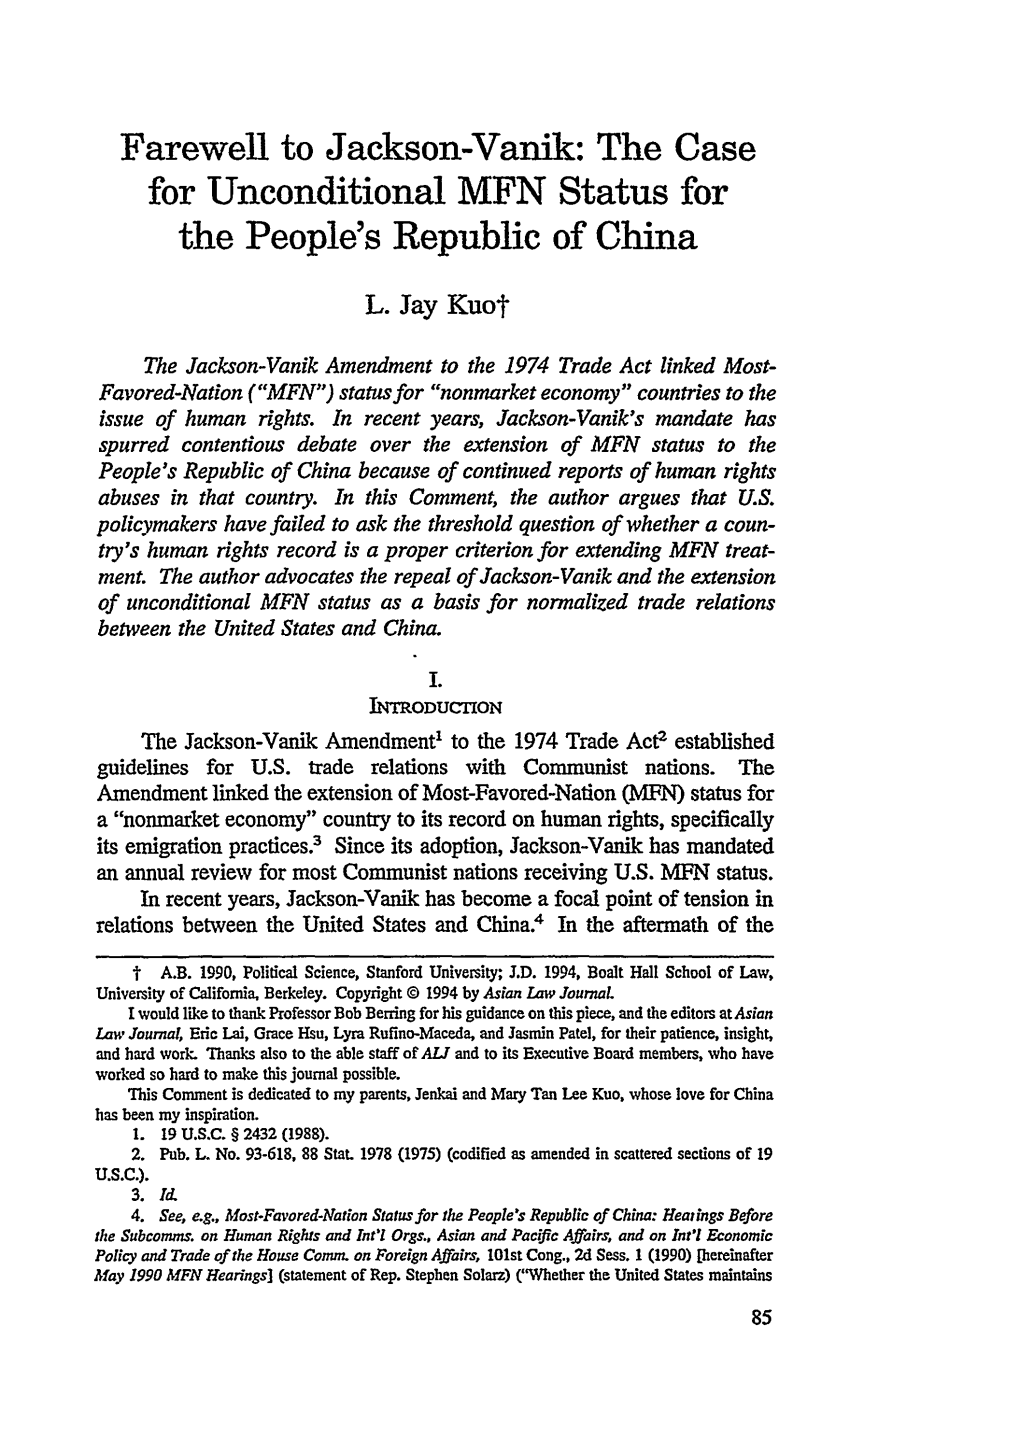 Farewell to Jackson-Vanik: the Case for Unconditional MFN Status for the People's Republic of China